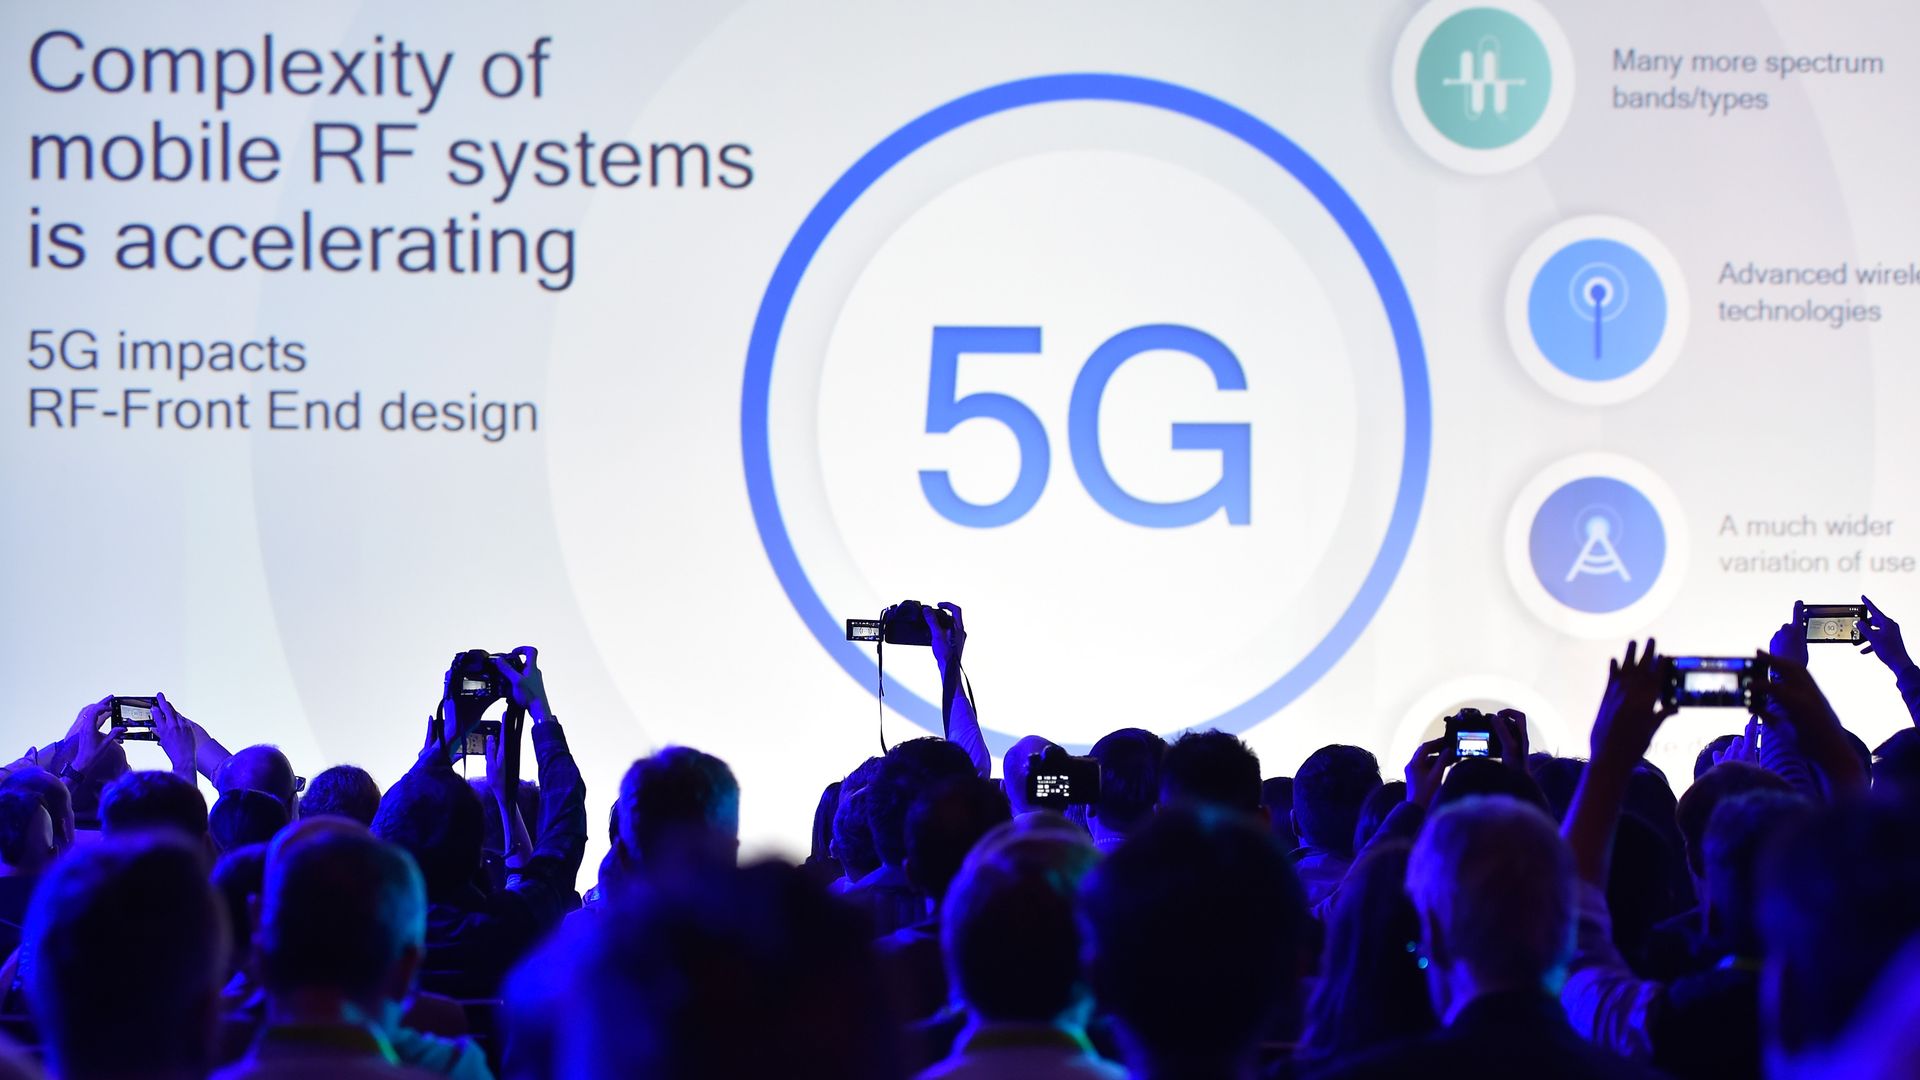 A 5G logo is displayed at an event